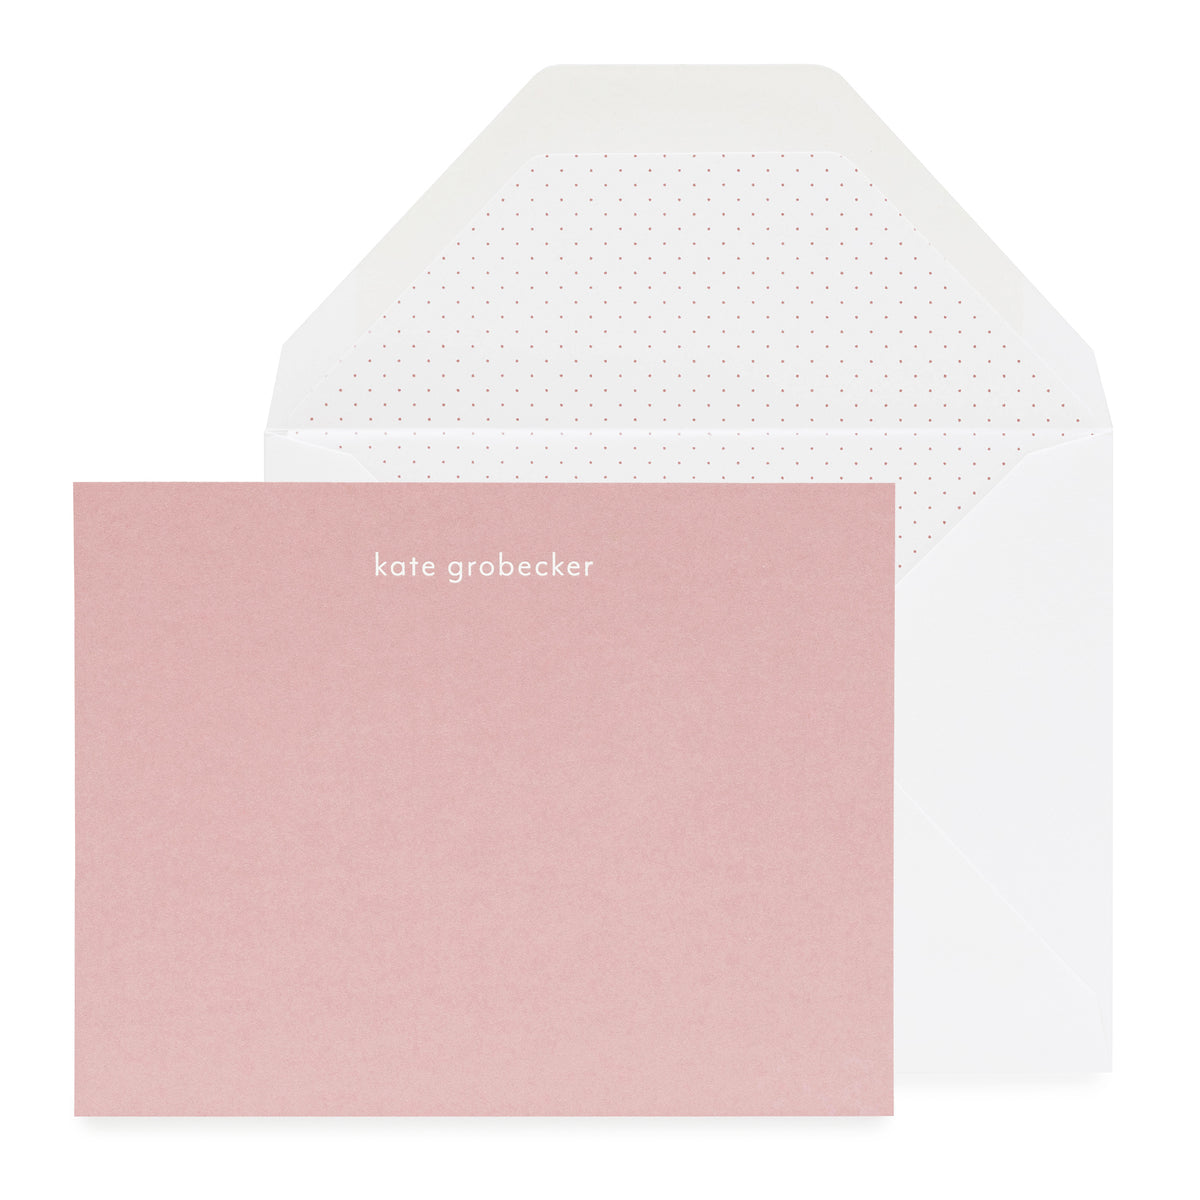 Dusty rose with white foil custom stationery with rose dot liner